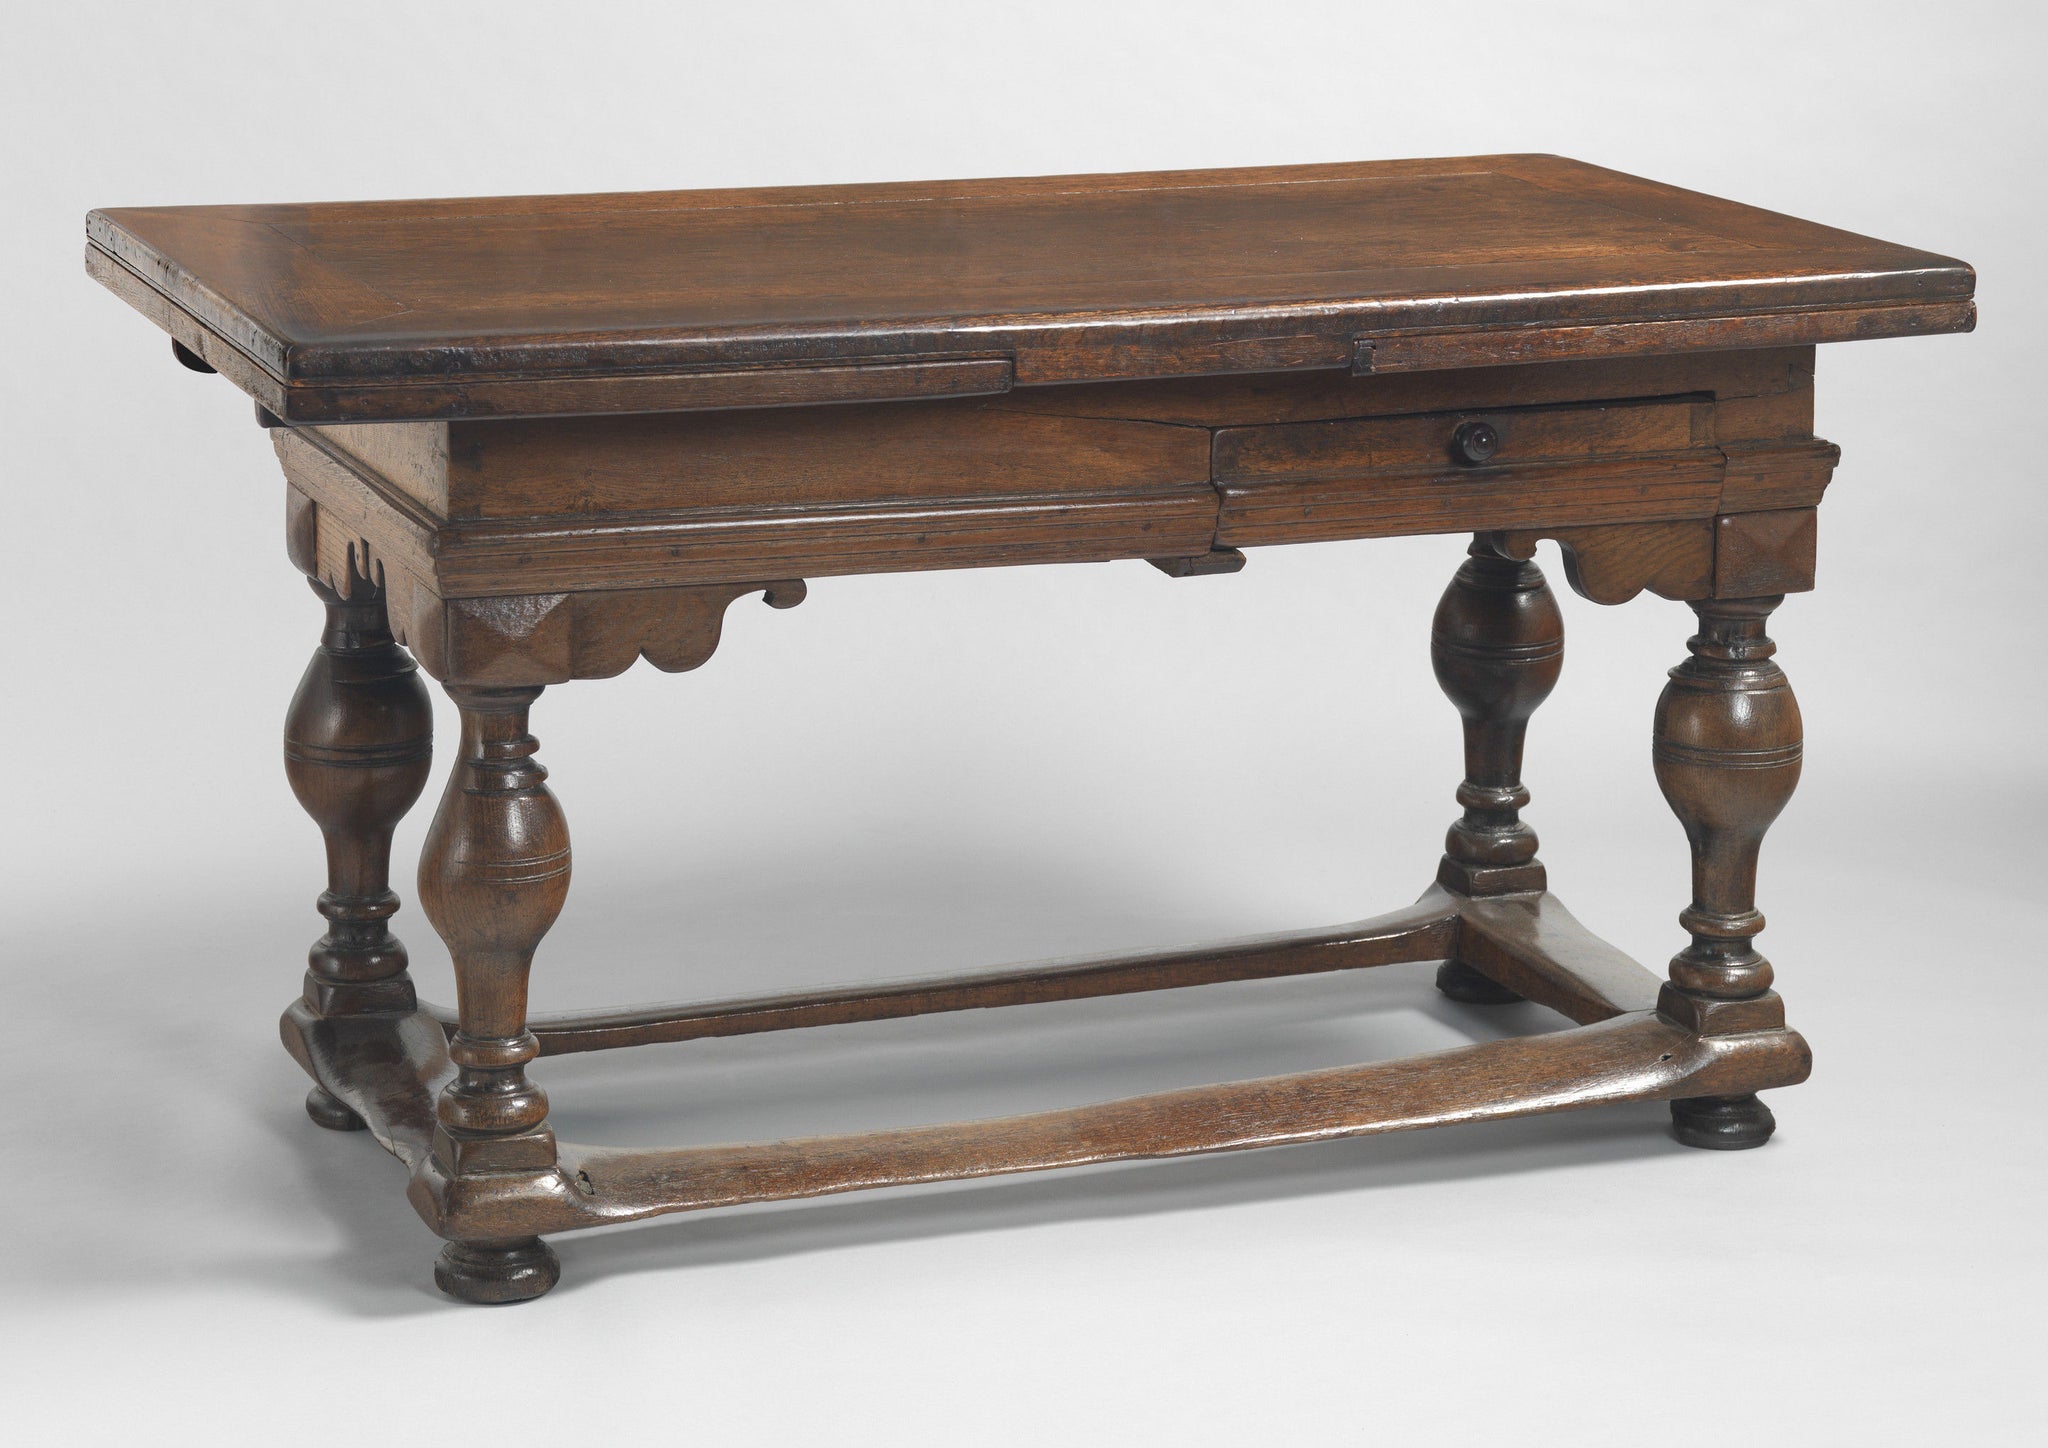 Magnificent Baroque Period Draw Leaf Table